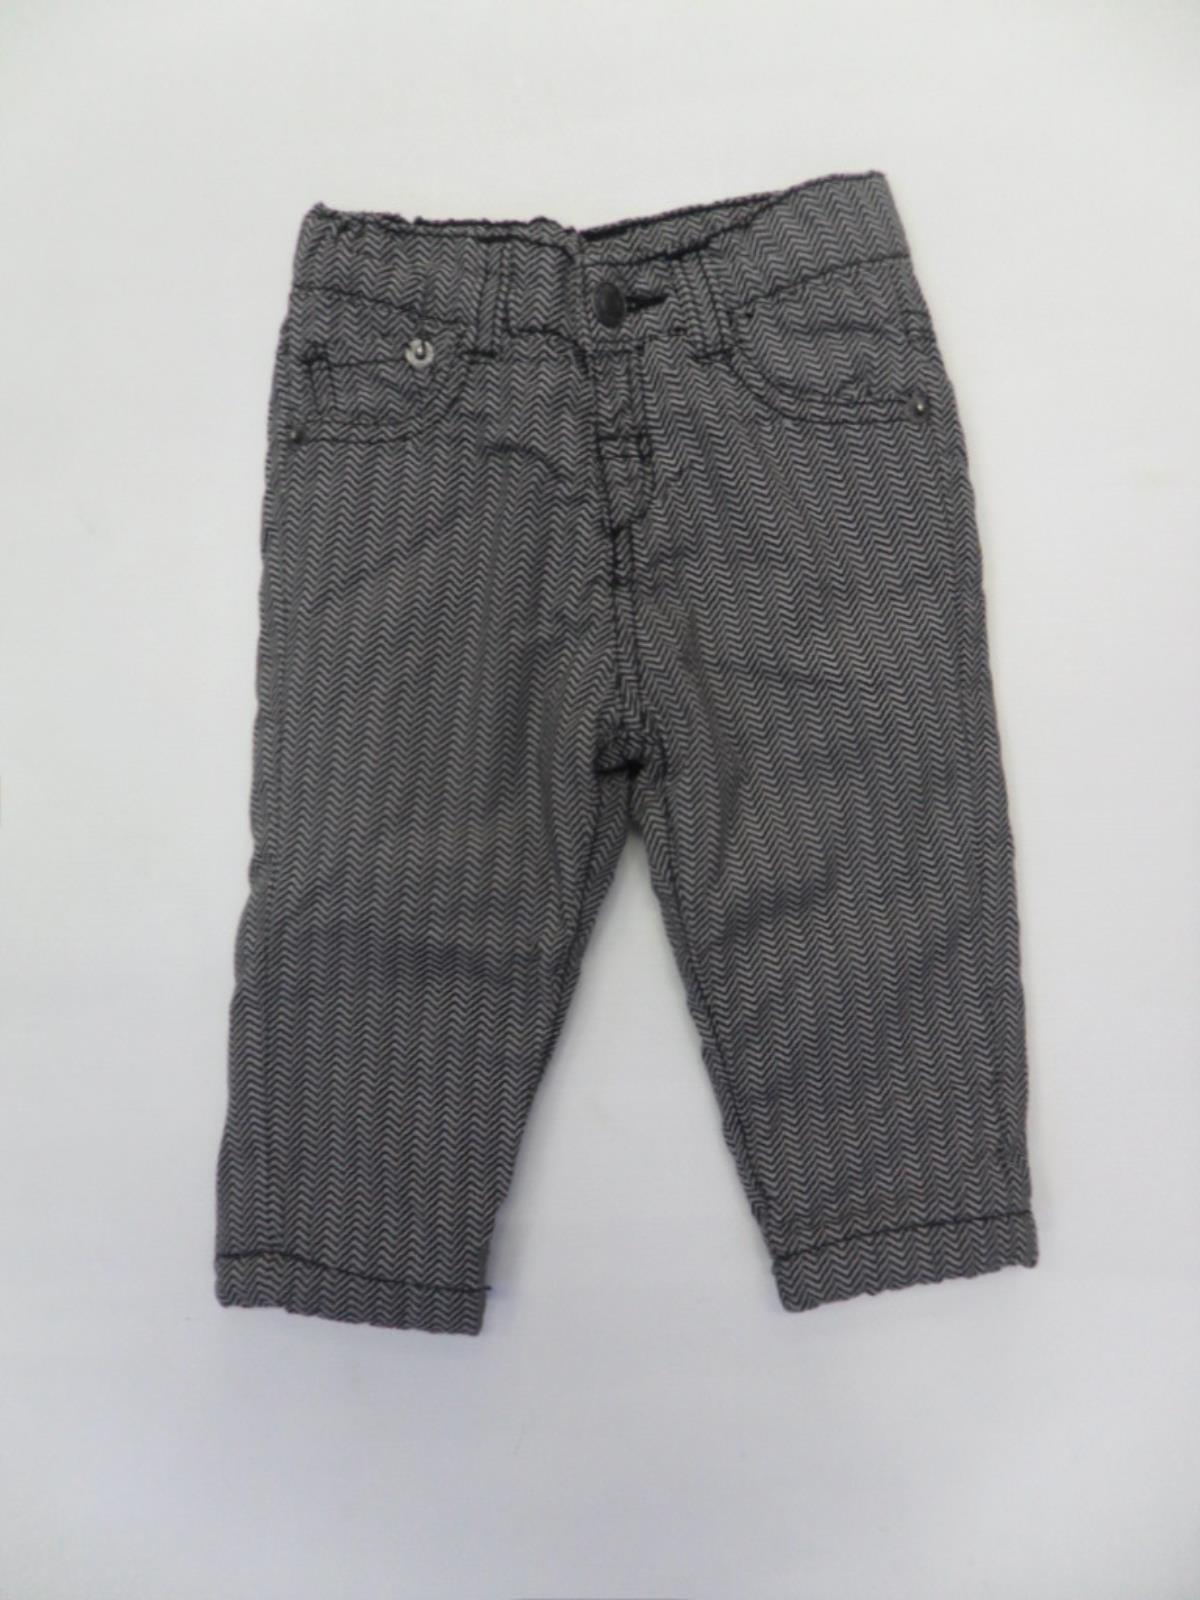 
  Trousers from the Tuc Tuc children's clothing line in technical herringbone fabric.
  Five poc...